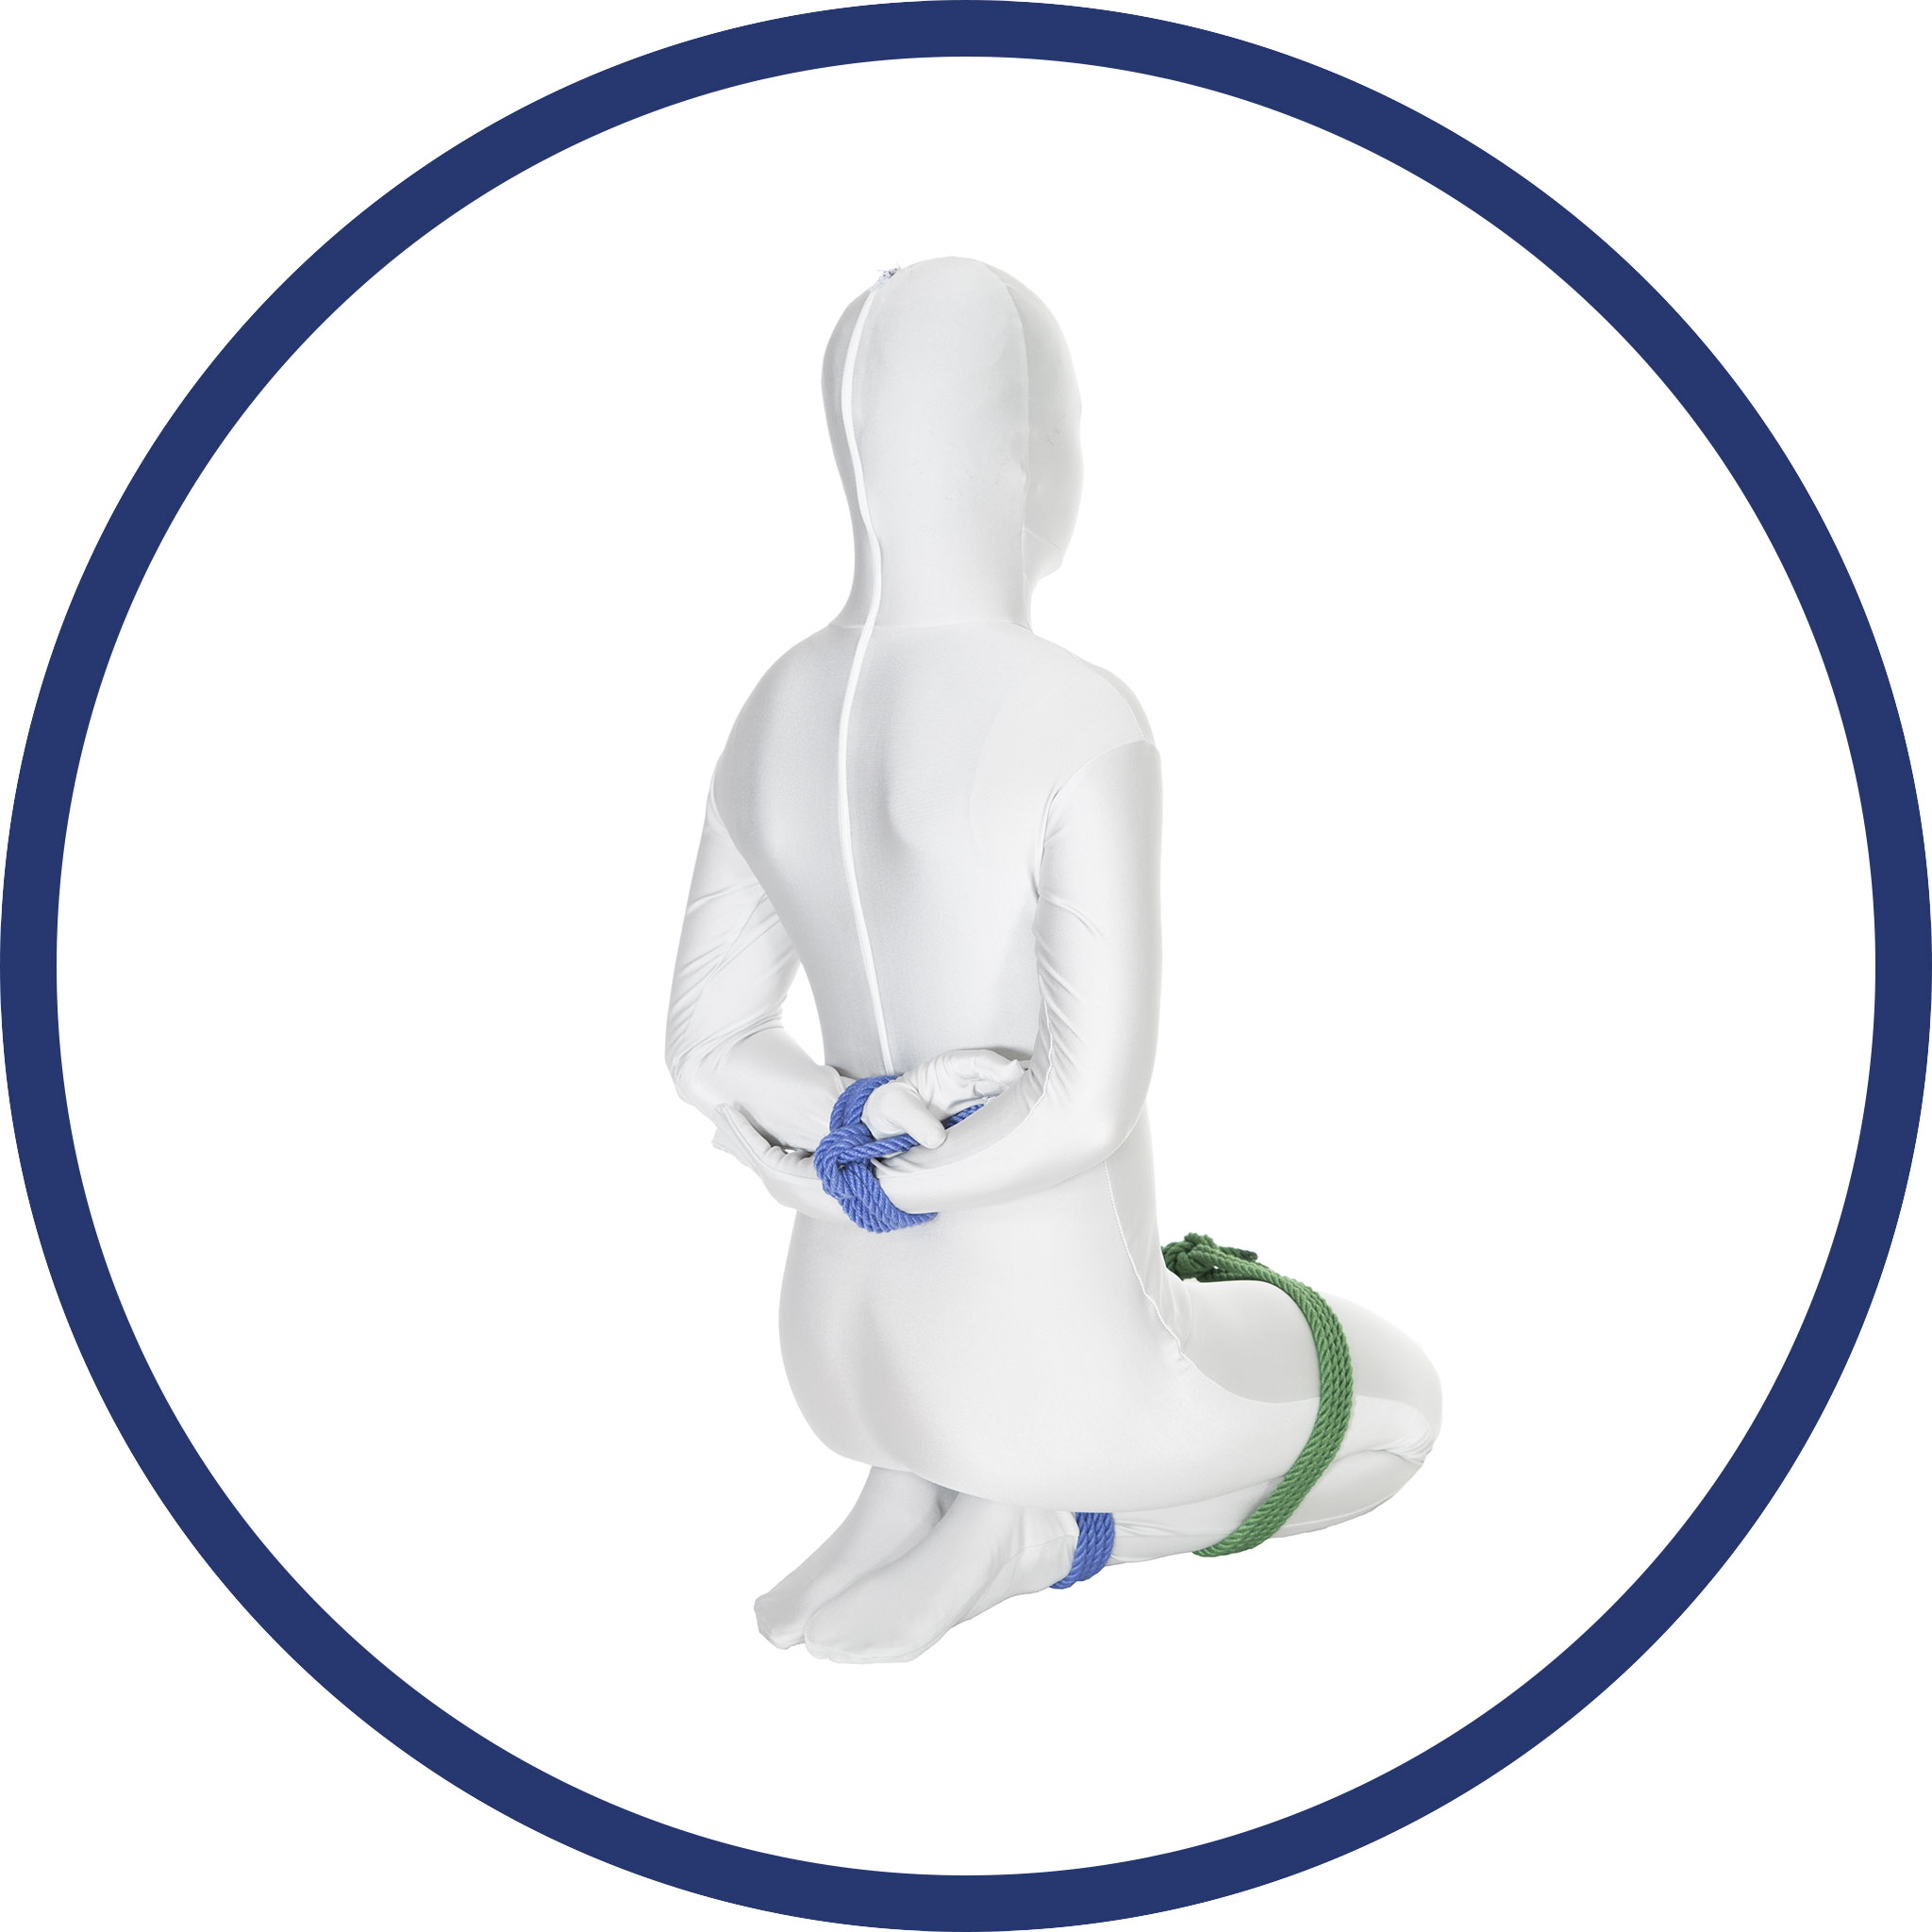 A person in a white bodysuit kneeling with their hands bound behind their back, inside a blue circle.